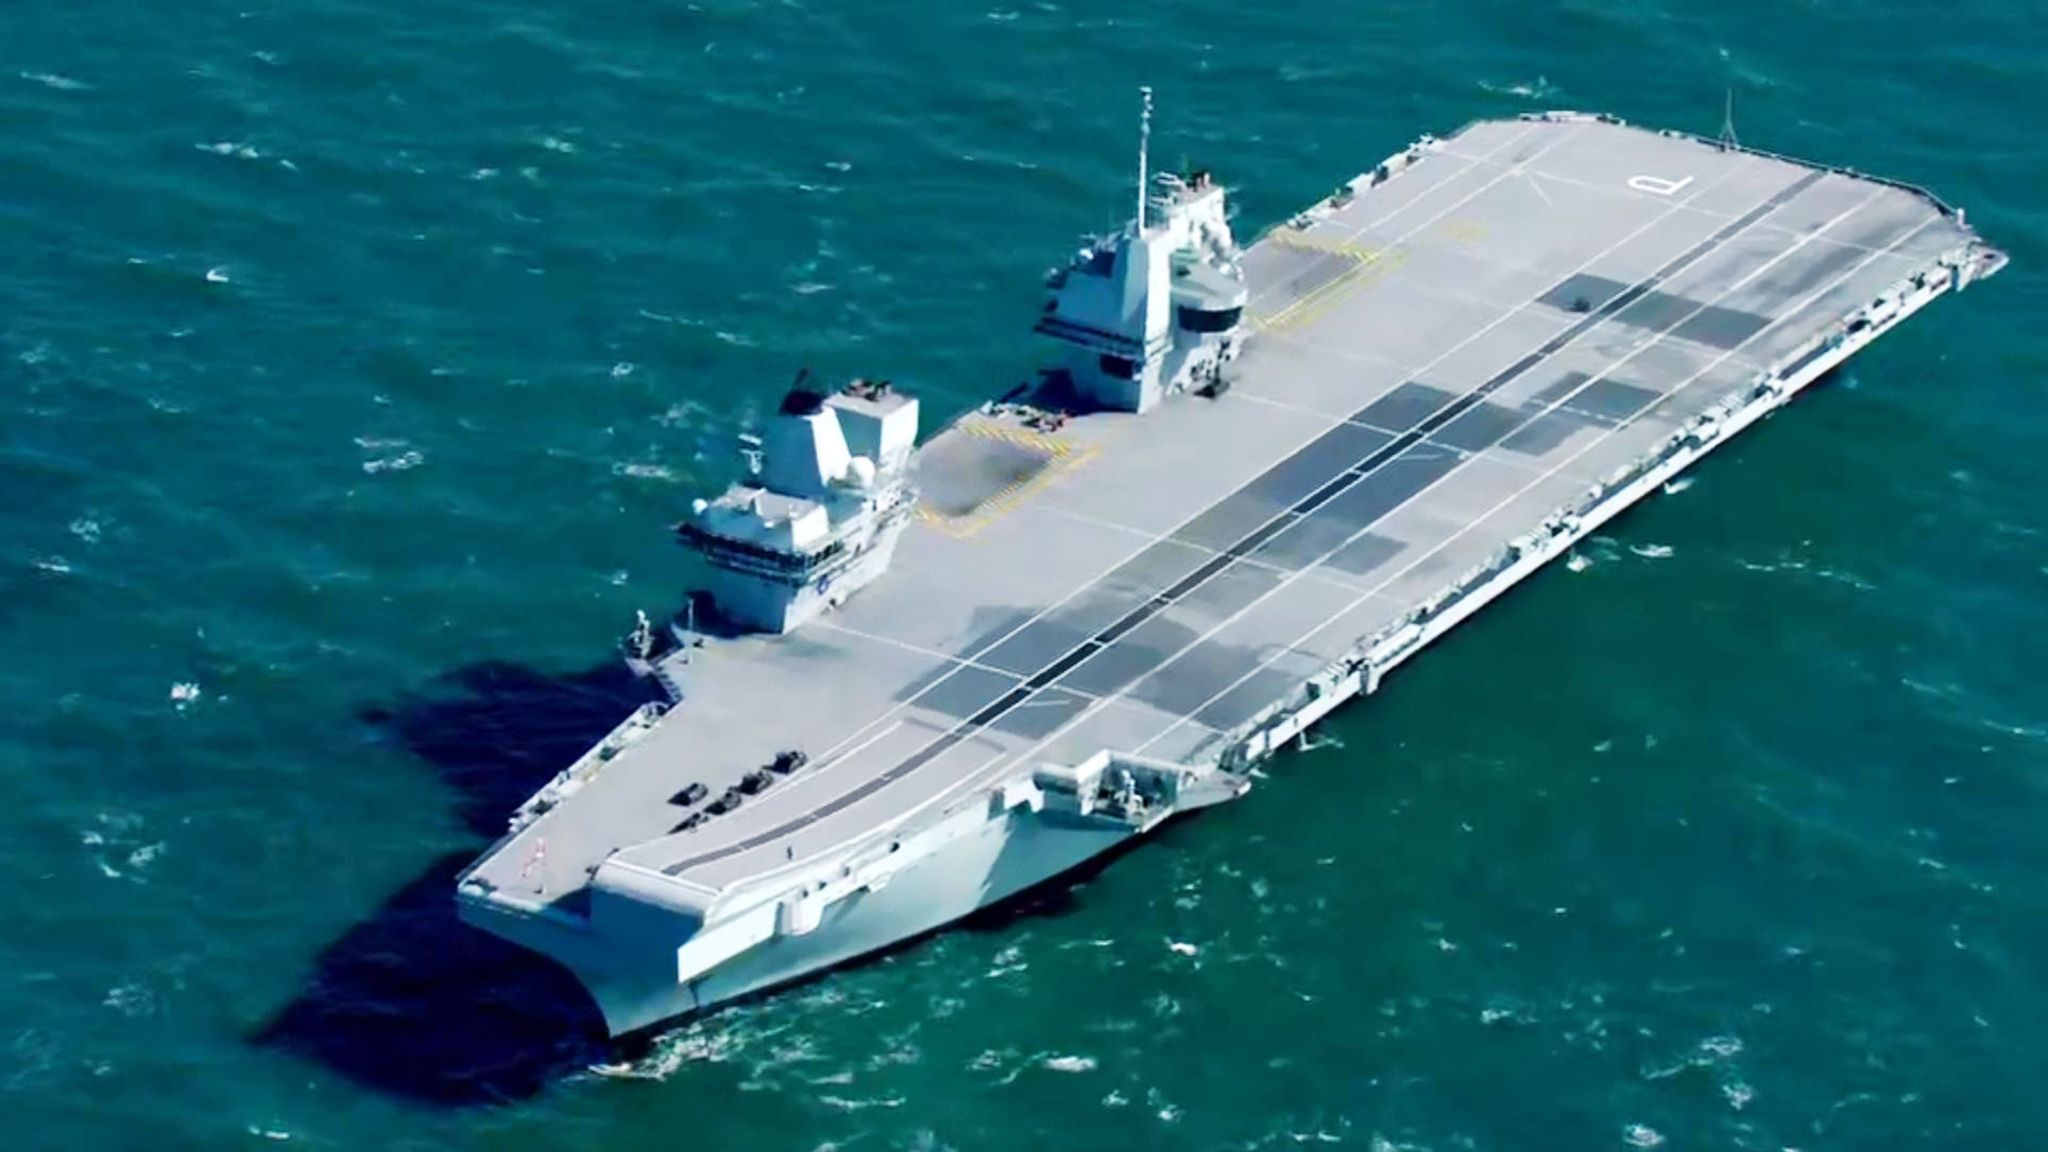 British Navy carrier breaks down after departing for US